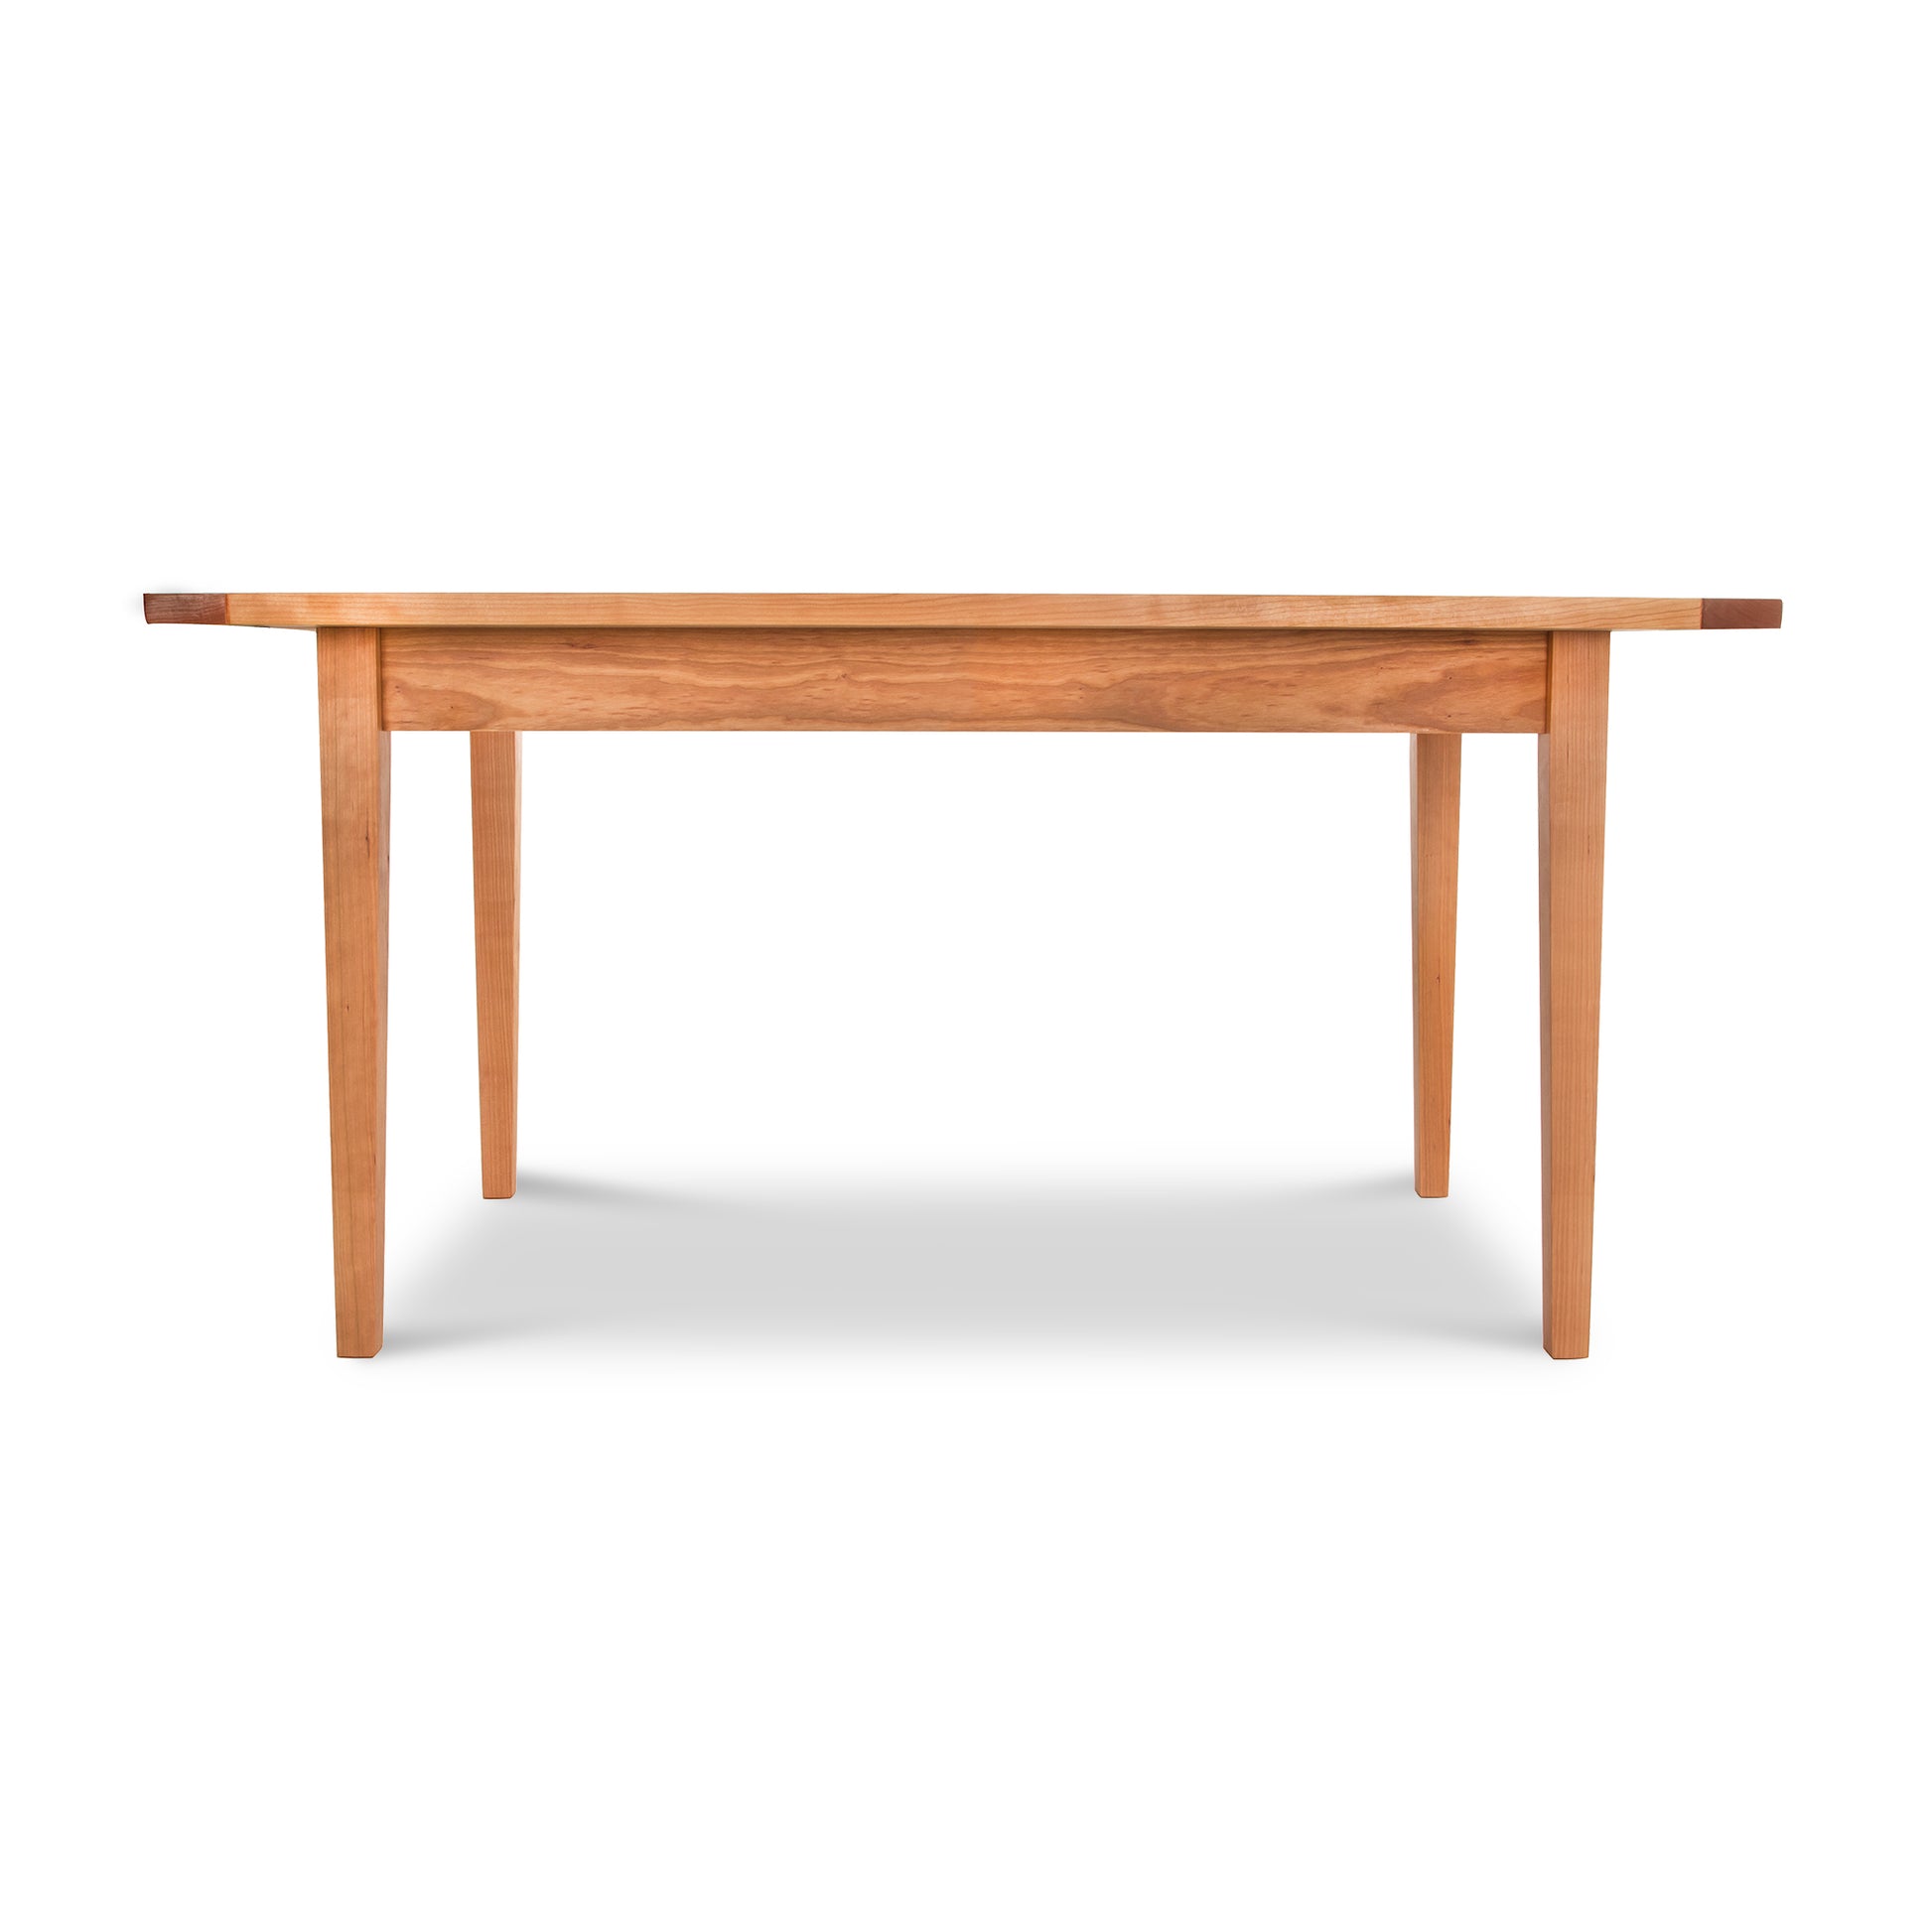 A warm Maple Corner Woodworks Vermont Shaker Harvest Extension Dining table with a wooden top.